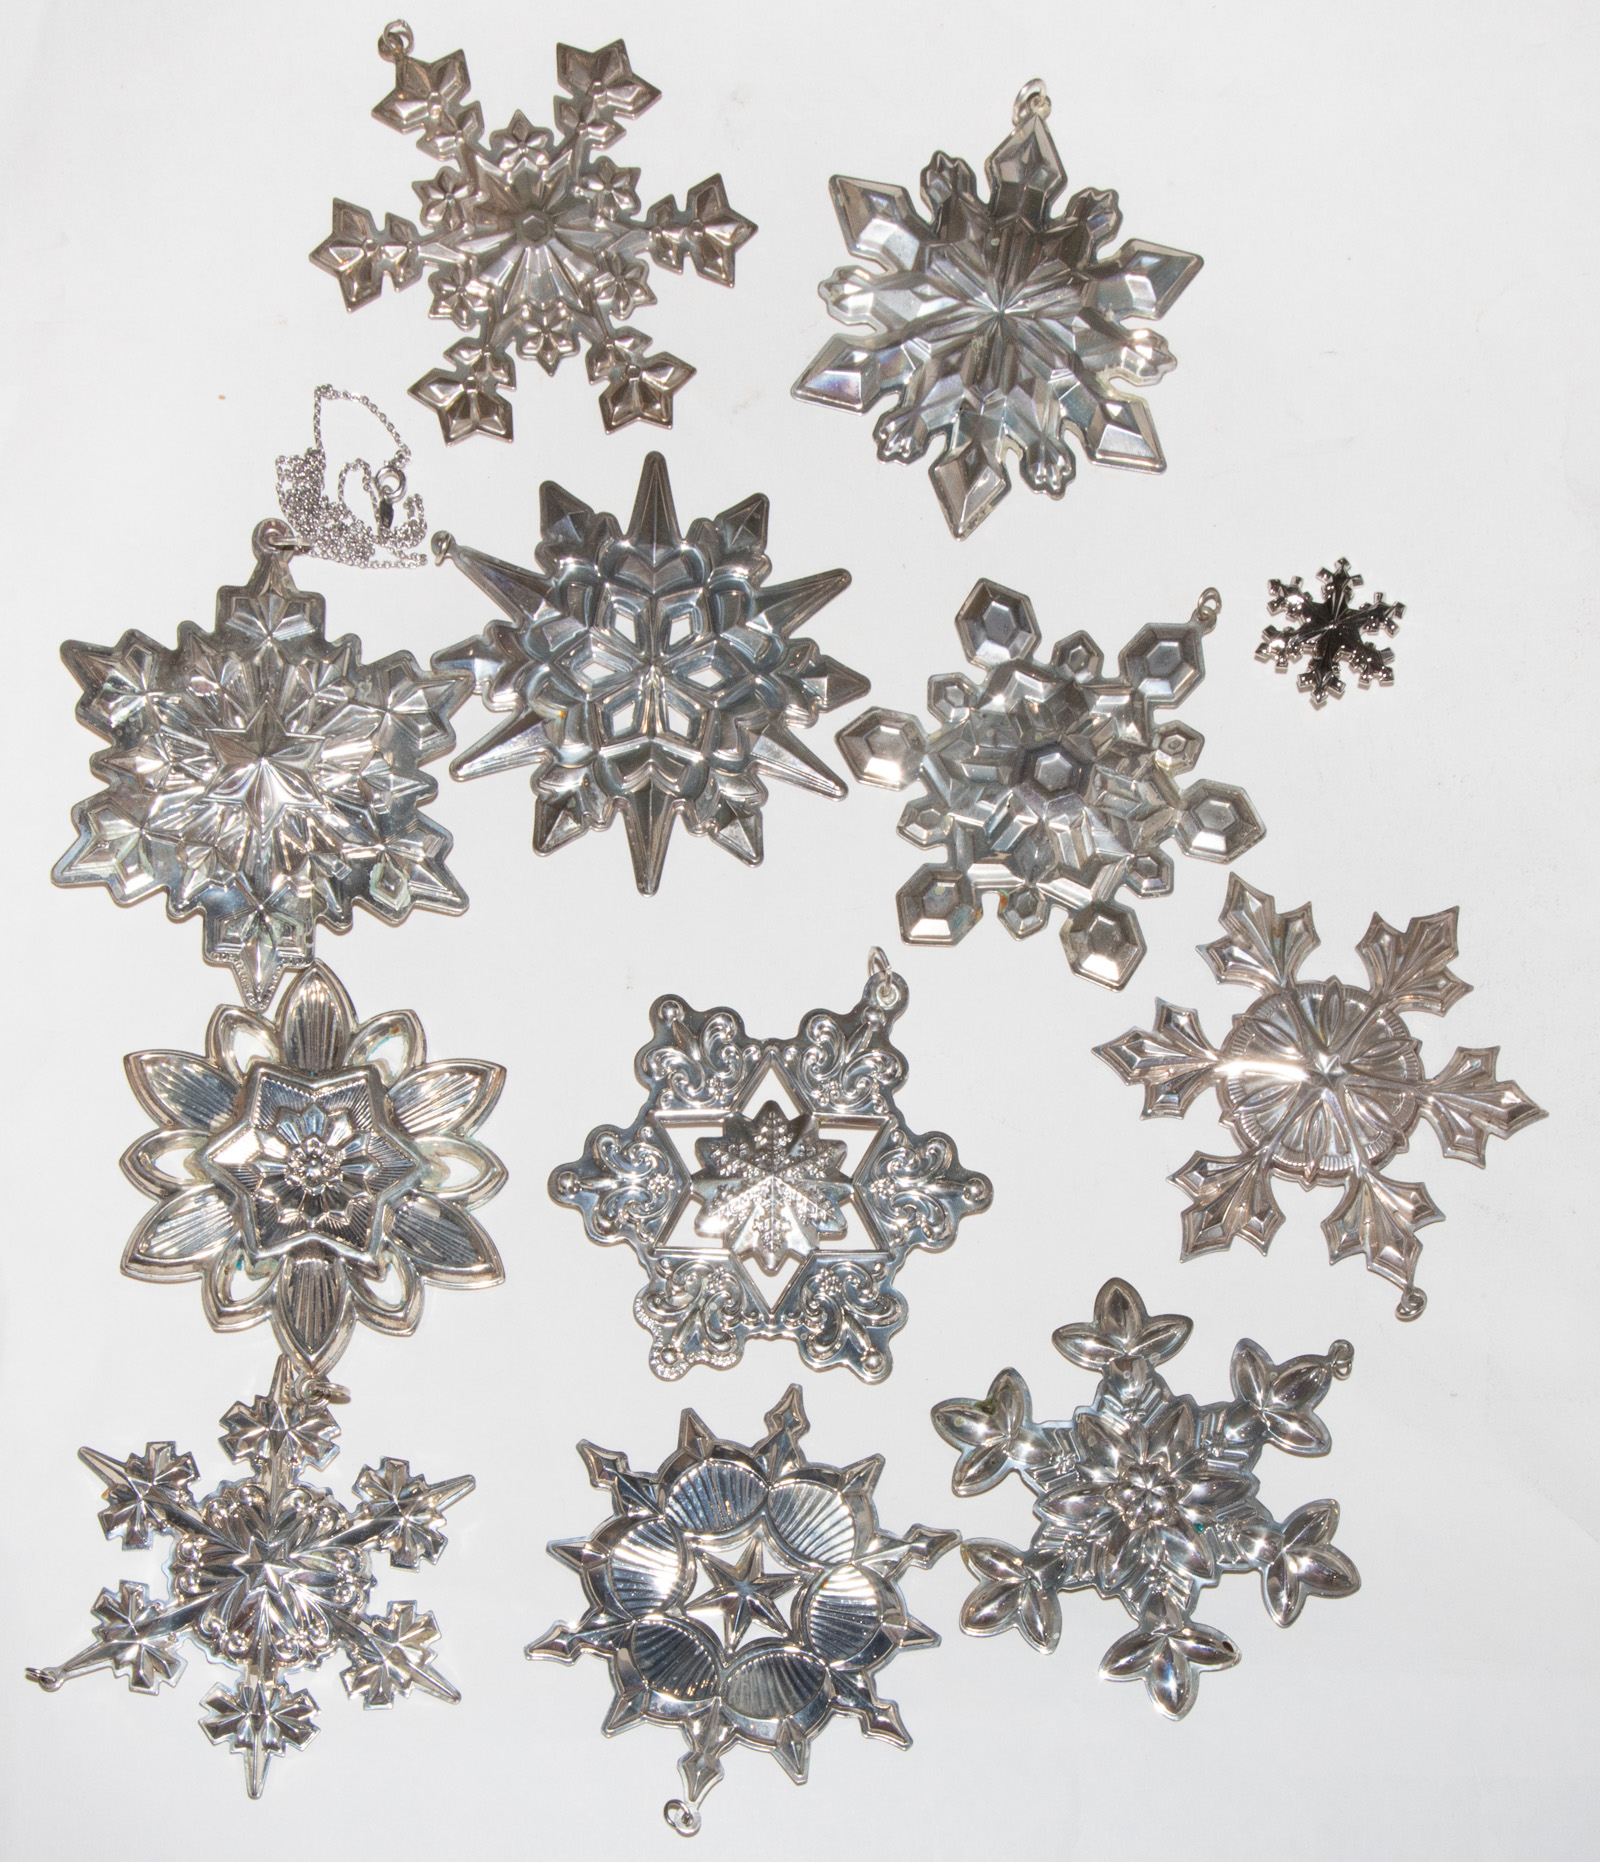 GORHAM STERLING SNOWFLAKES Cover the